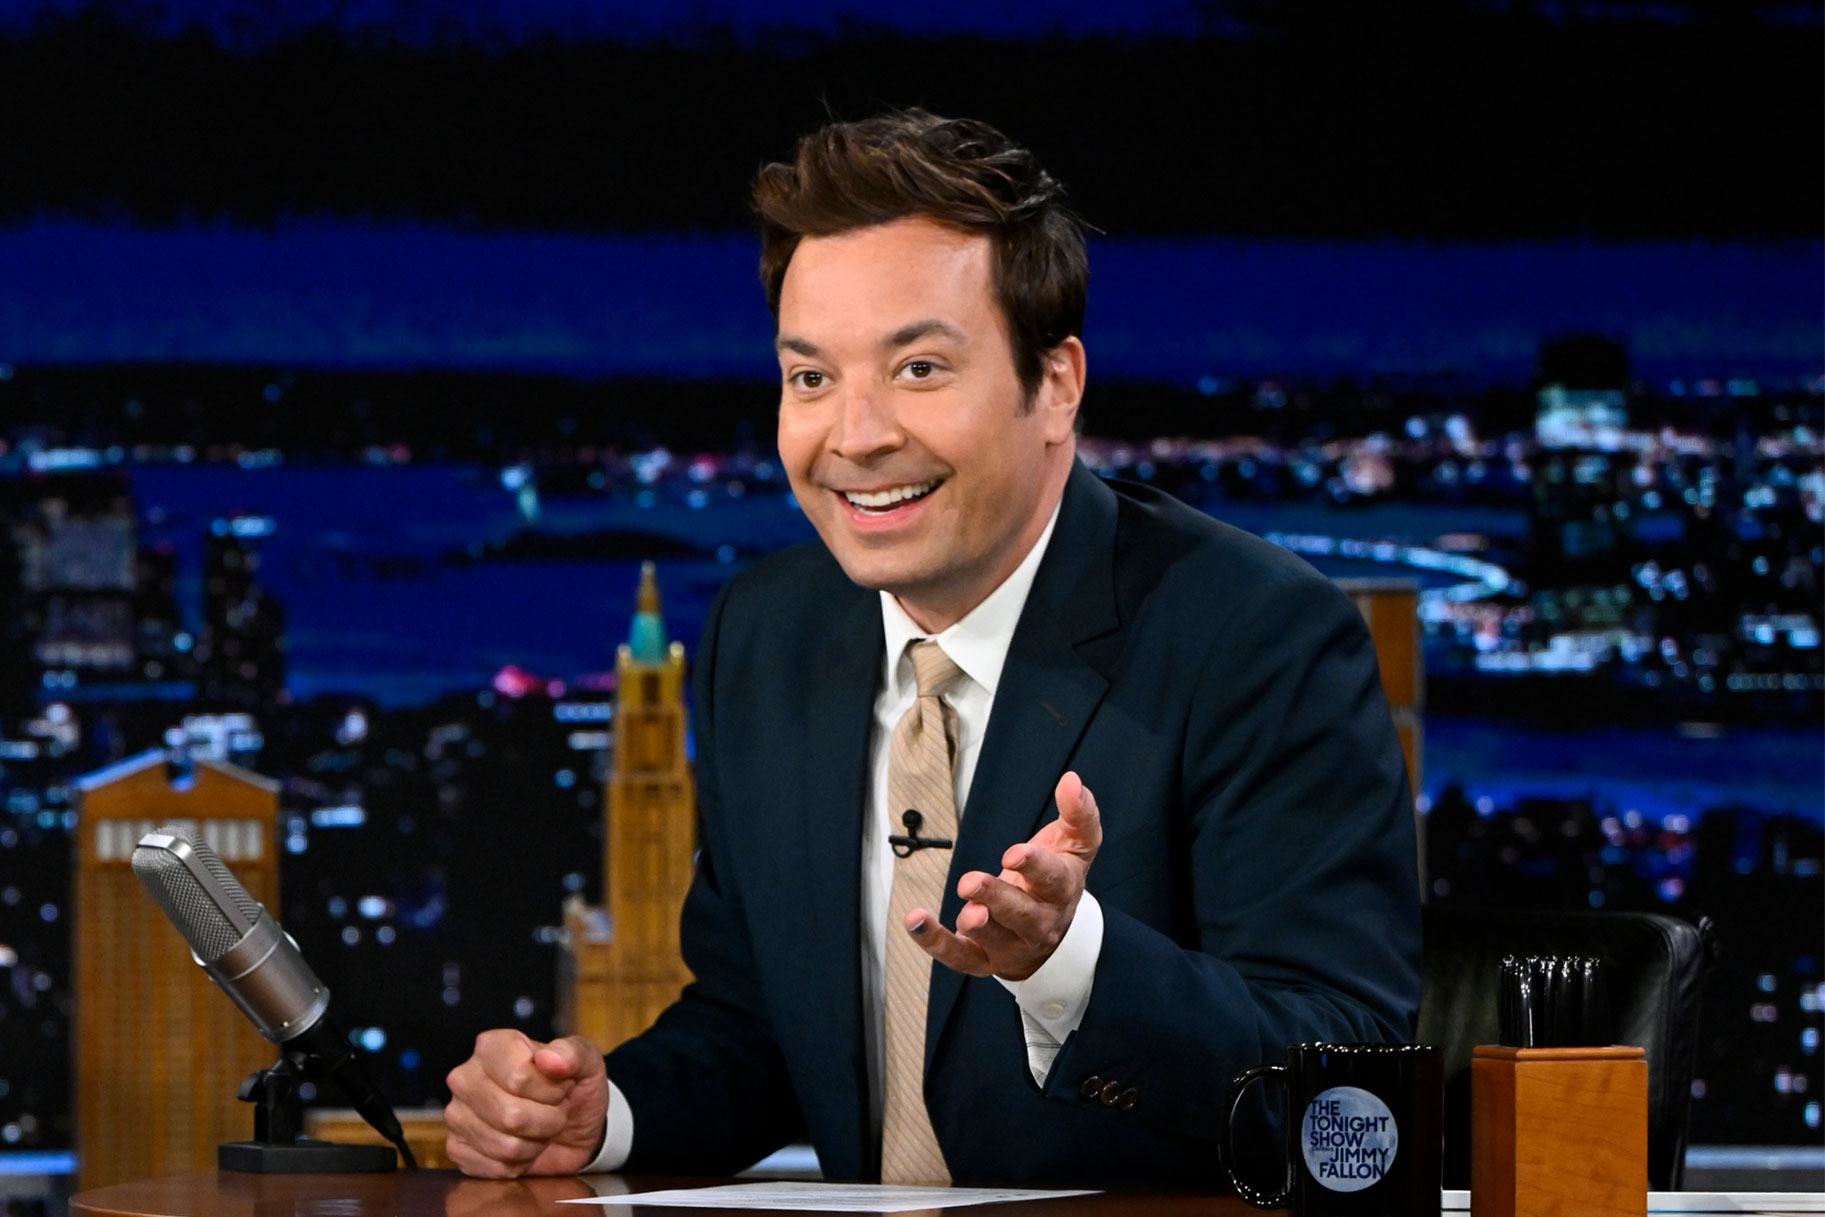 Jimmy fallon biography personalities famous childhood life american actor host his timeline achievements thefamouspeople profiles